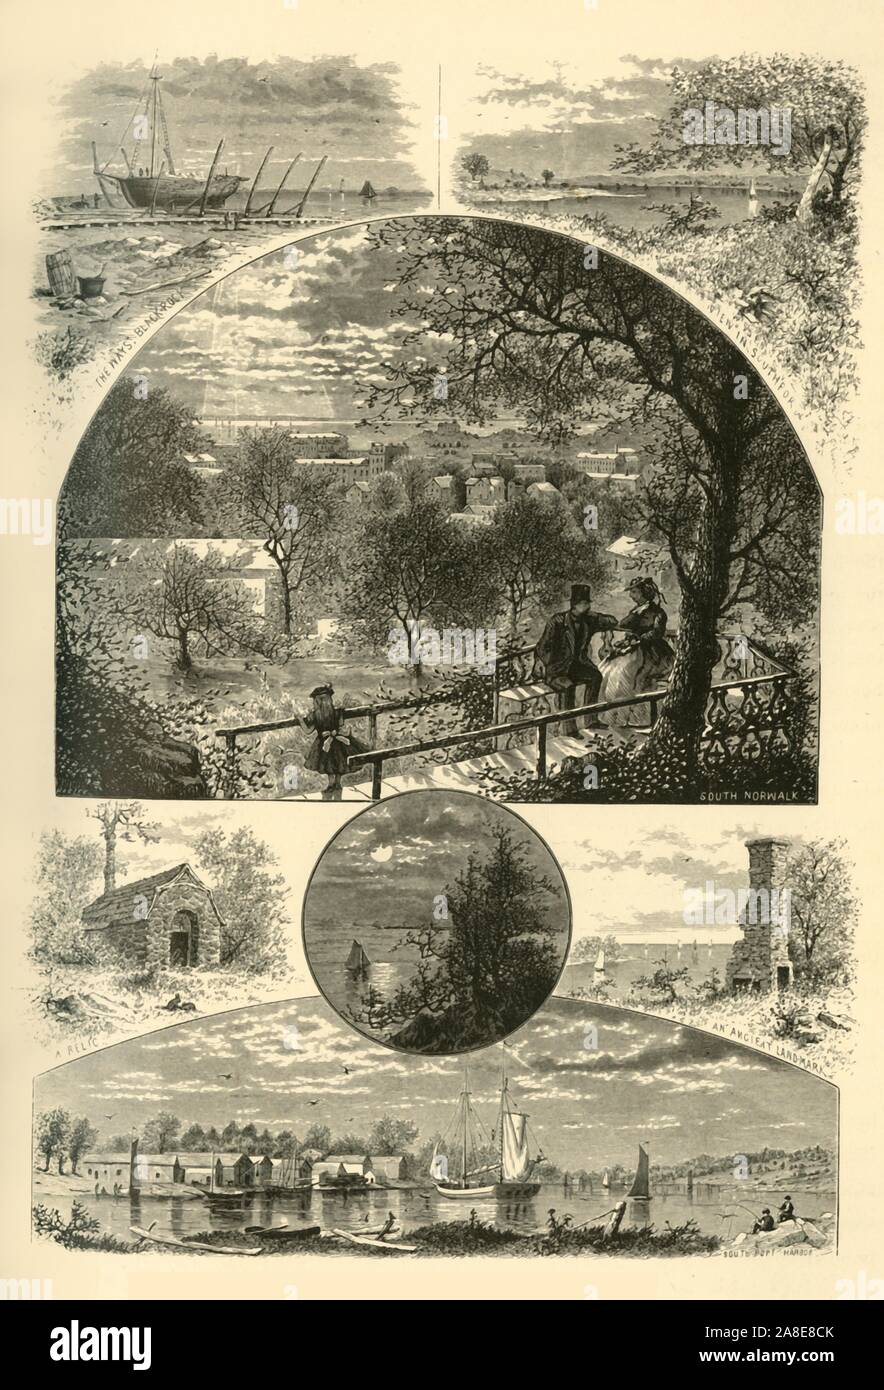 'Glimpses of South Norwalk and Southport', 1874. 'The Ways, Black Rock; View in Southport; South Norwalk; A Relic; An Ancient Landmark; Southport Harbor', Connecticut, USA. Views around the coast of New England. 'The &quot;Ancient Landmark&quot;...is believed to be the chimney of an old Revolutionary building of historic interest, and the subject of many legendary anecdotes. It presents some internal evidence of having been used as a place of concealment, perhaps by Tories hiding from pursuing colonists. Its preservation for so long a time in its ruined condition is said to be the result of go Stock Photo